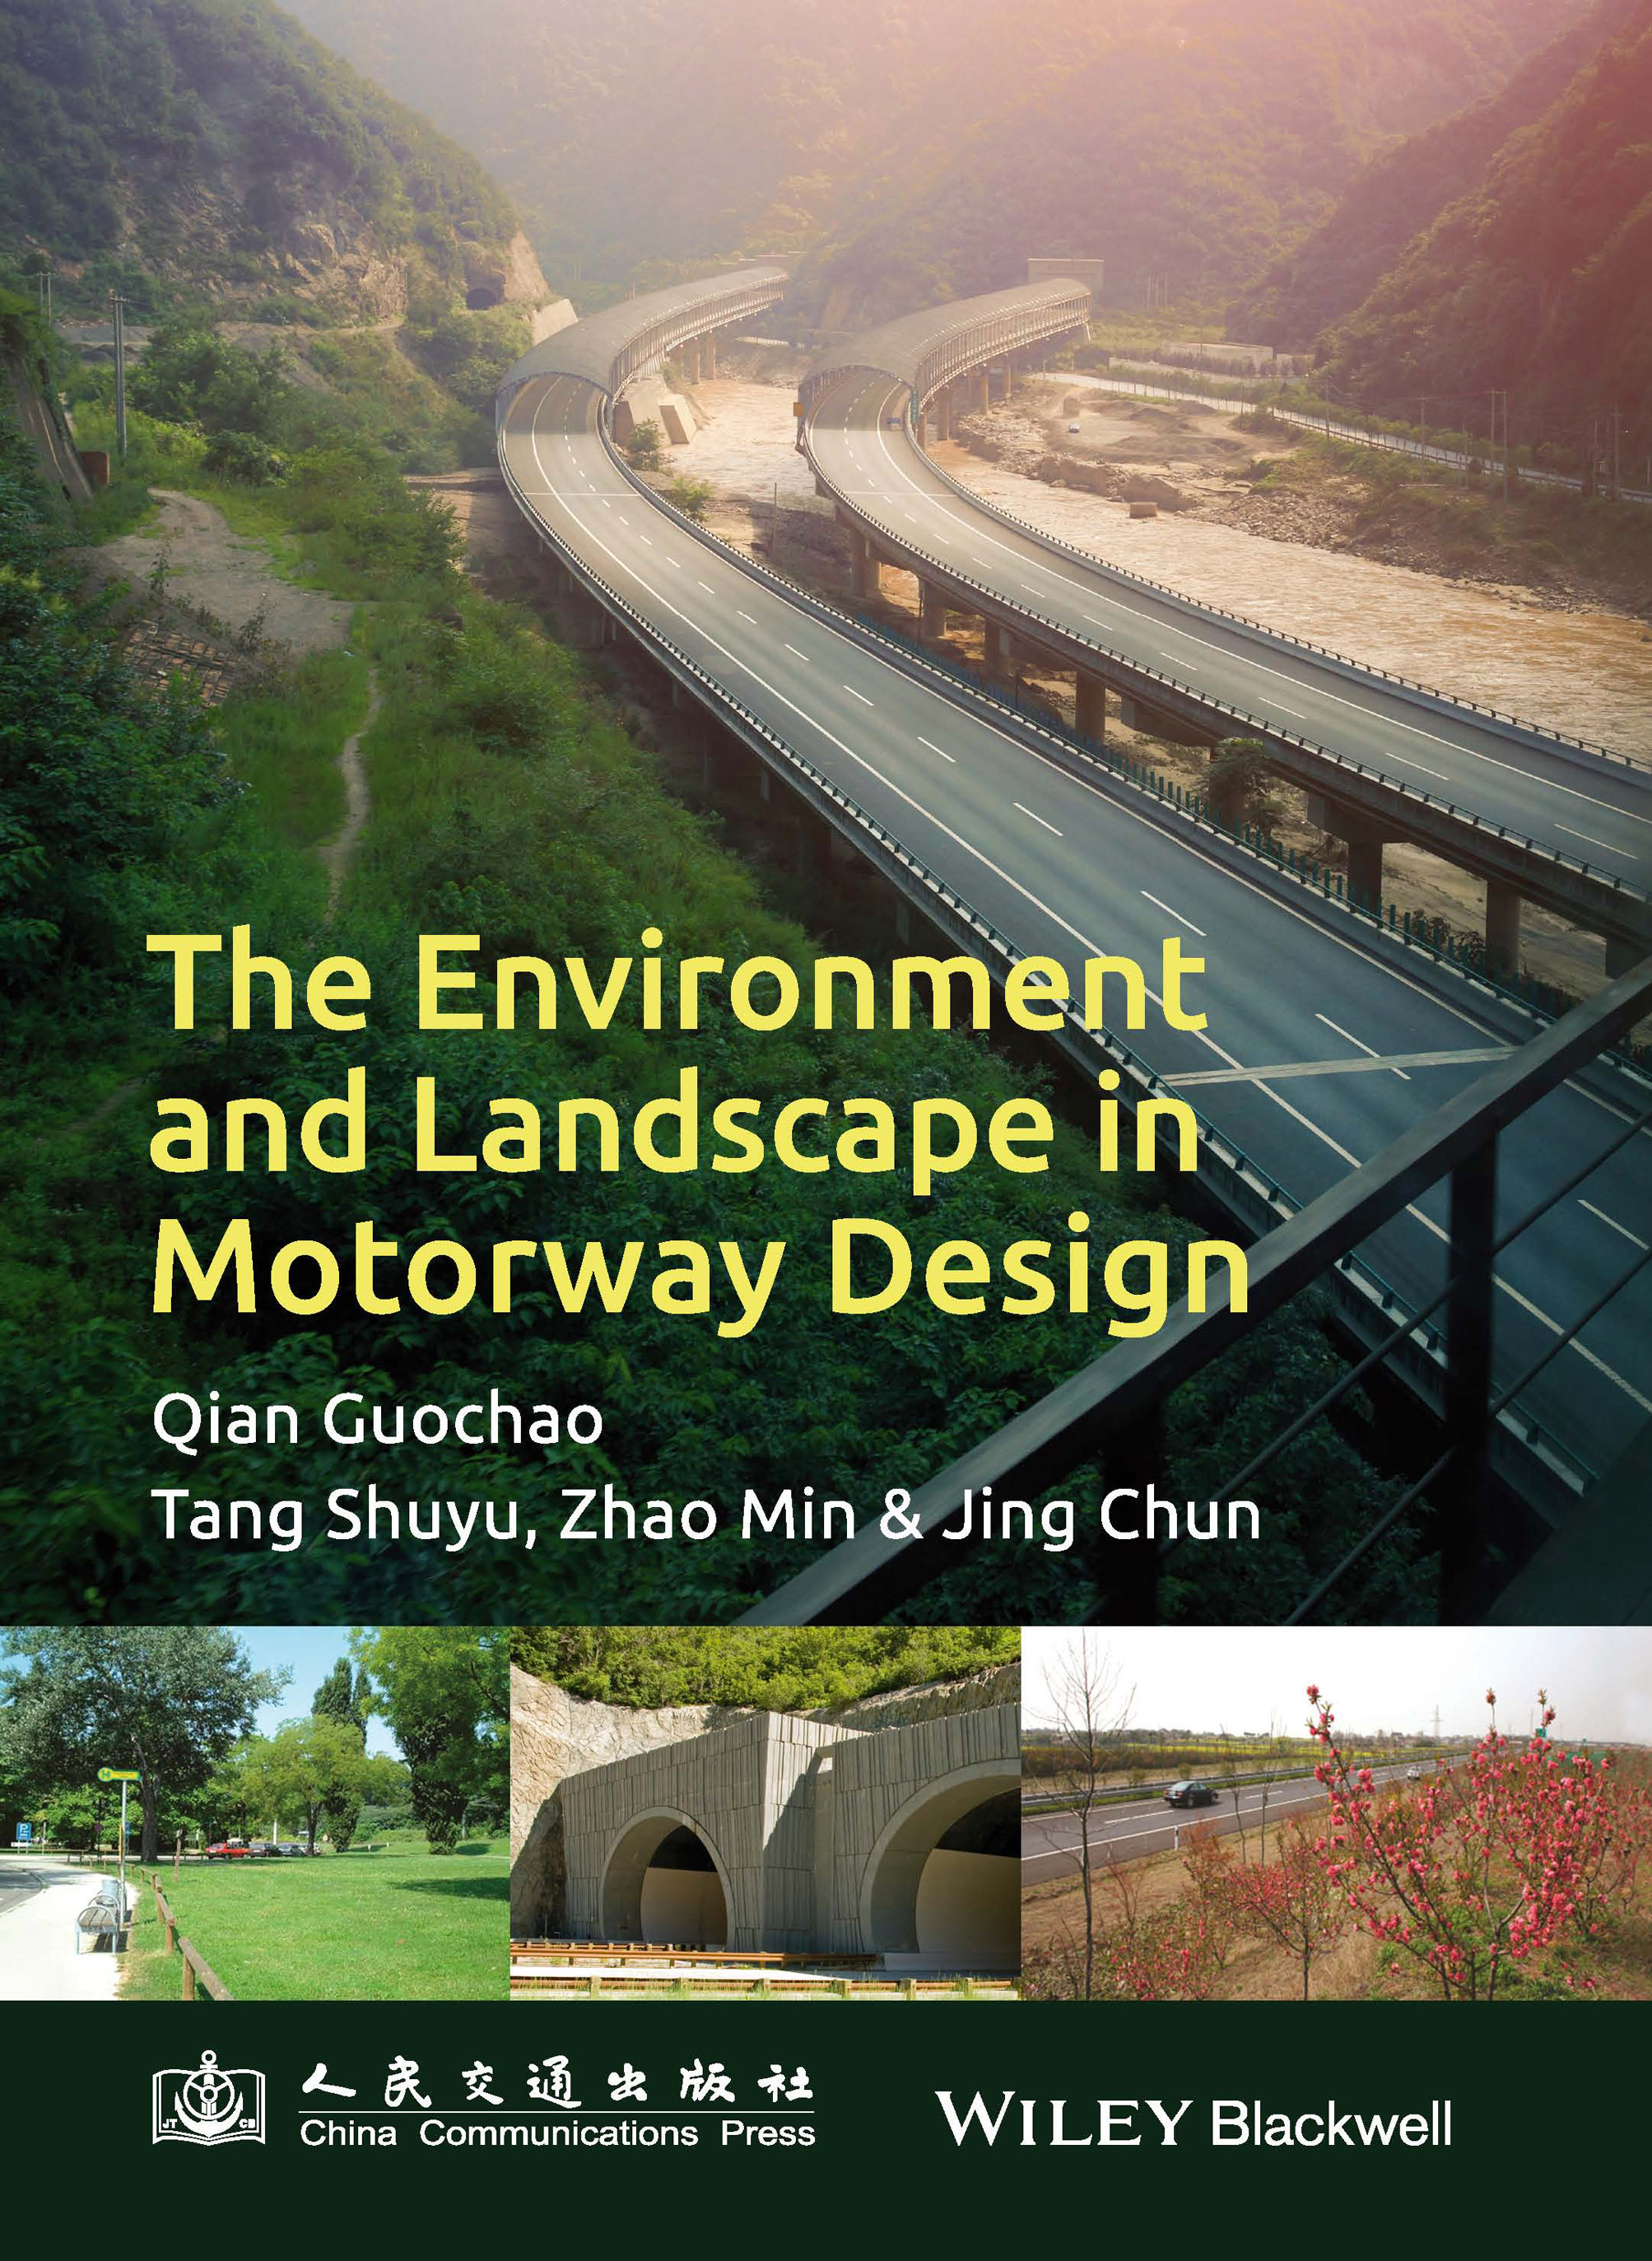 The environment and landscape in motorway design